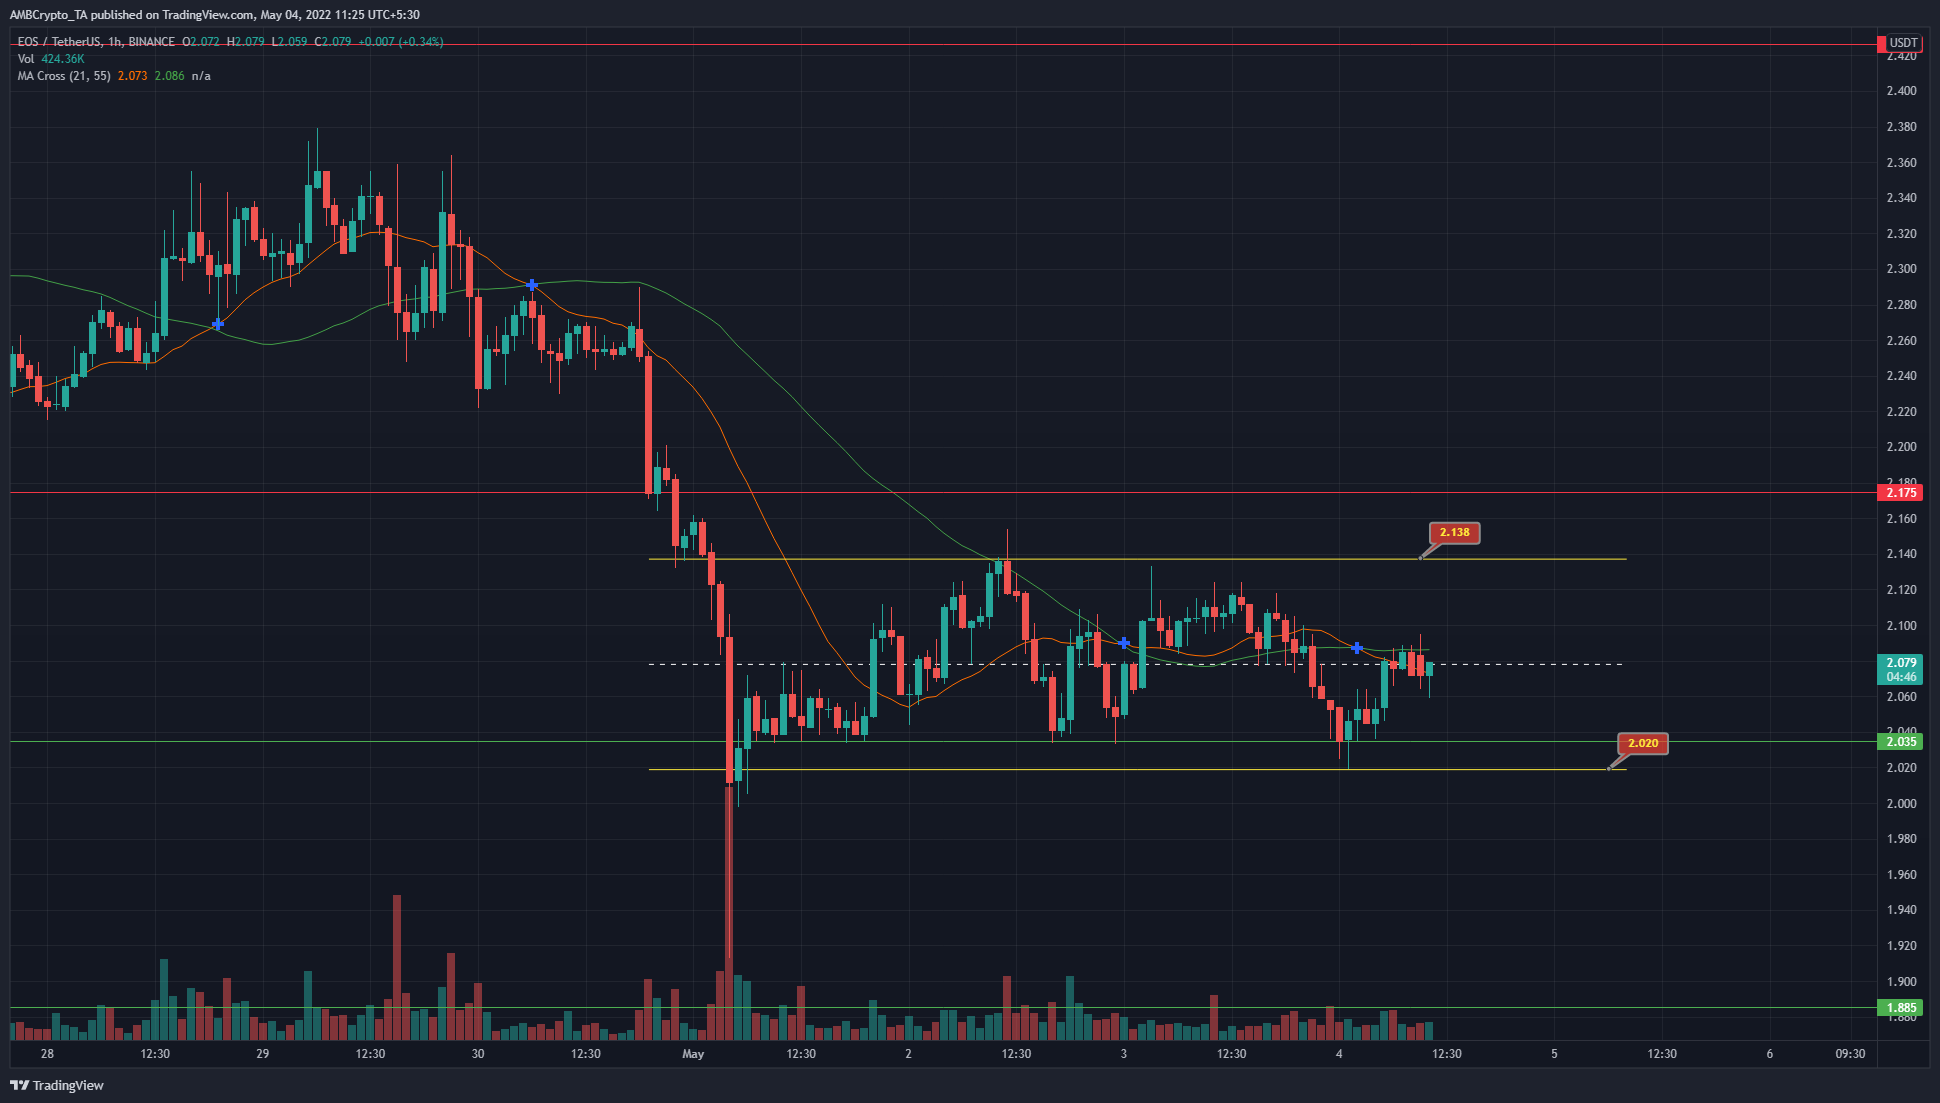 EOS forms a range after downtrend and could be consolidating above support